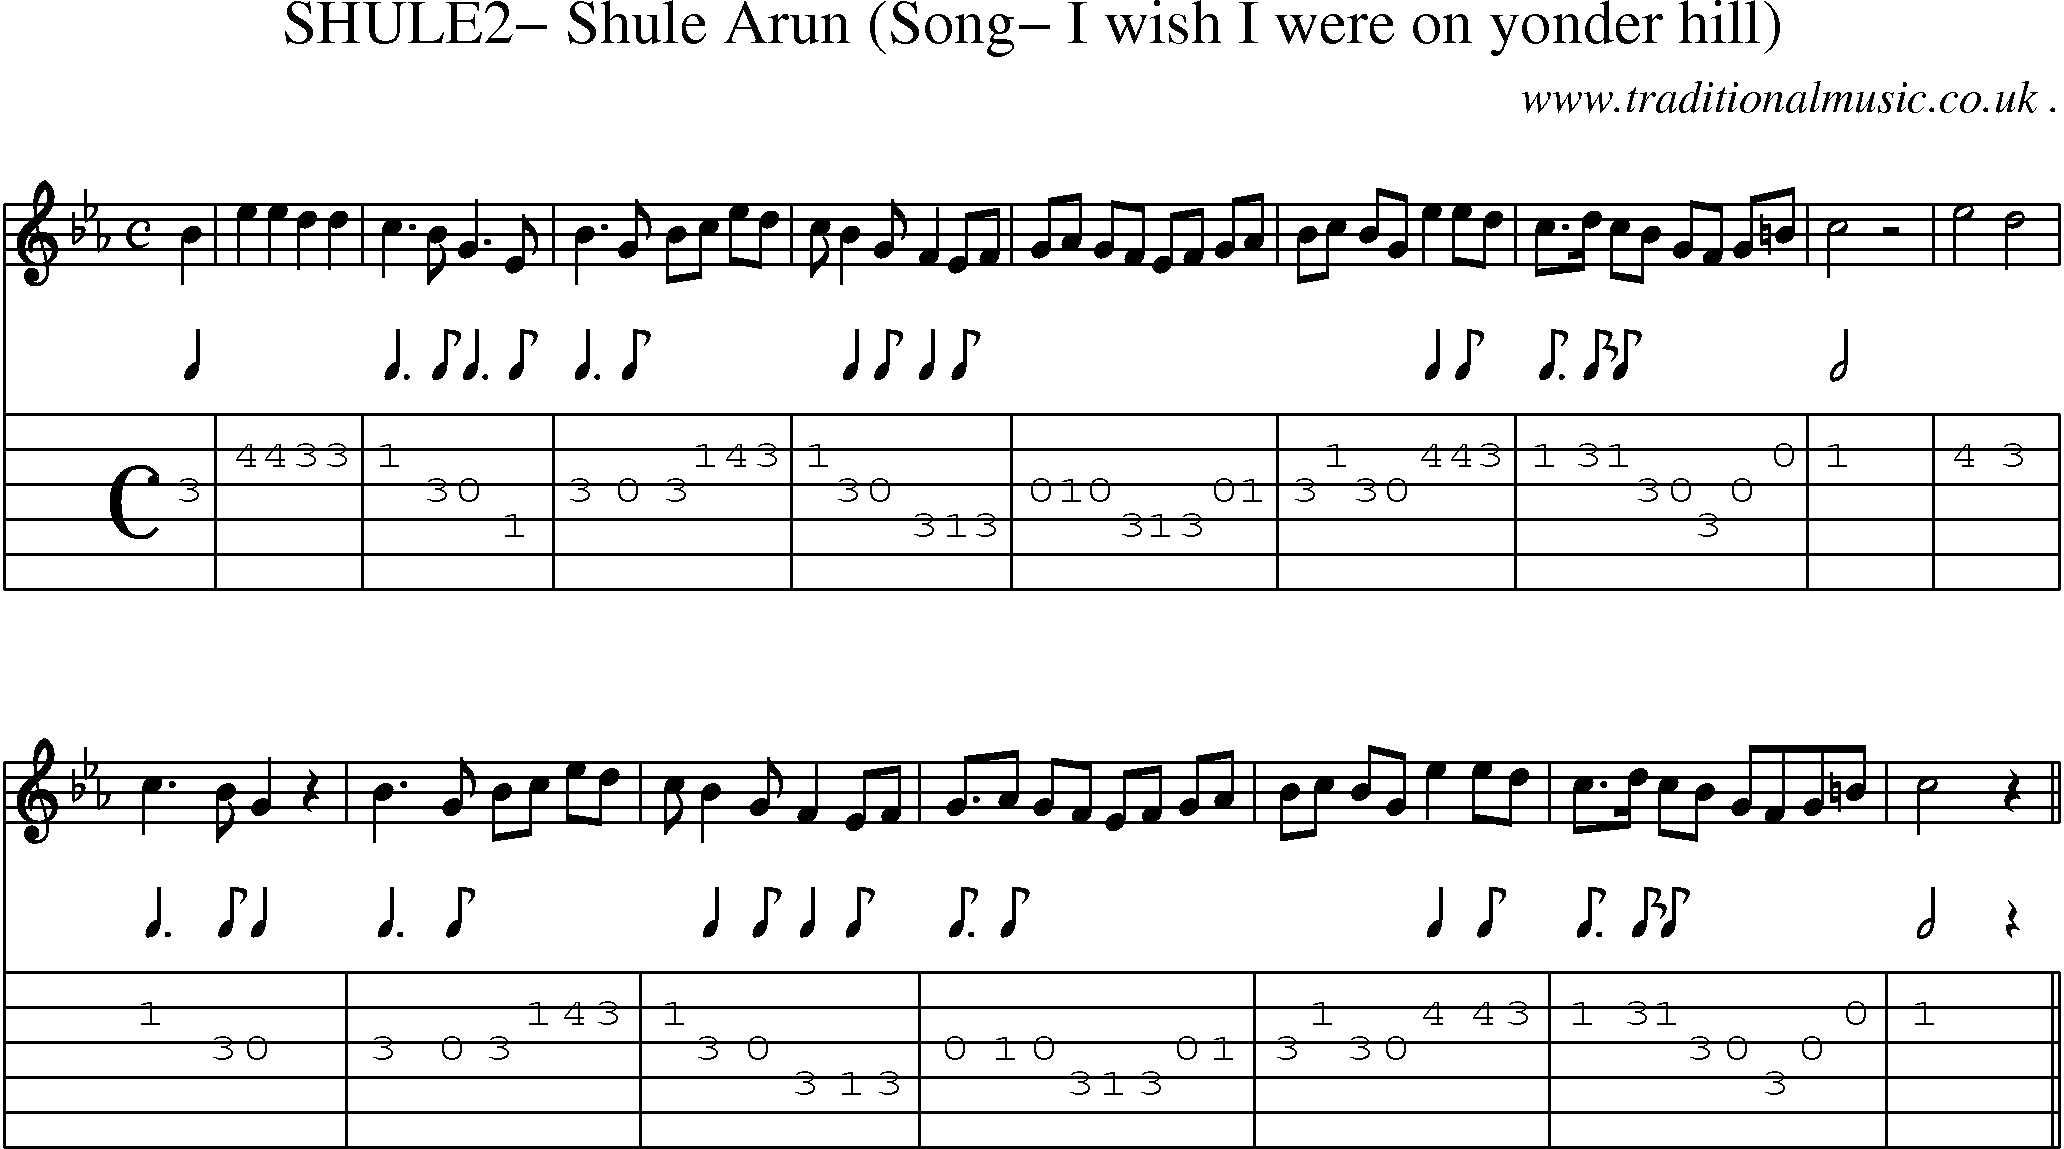 Sheet-Music and Guitar Tabs for Shule2 Shule Arun (song I Wish I Were On Yonder Hill)